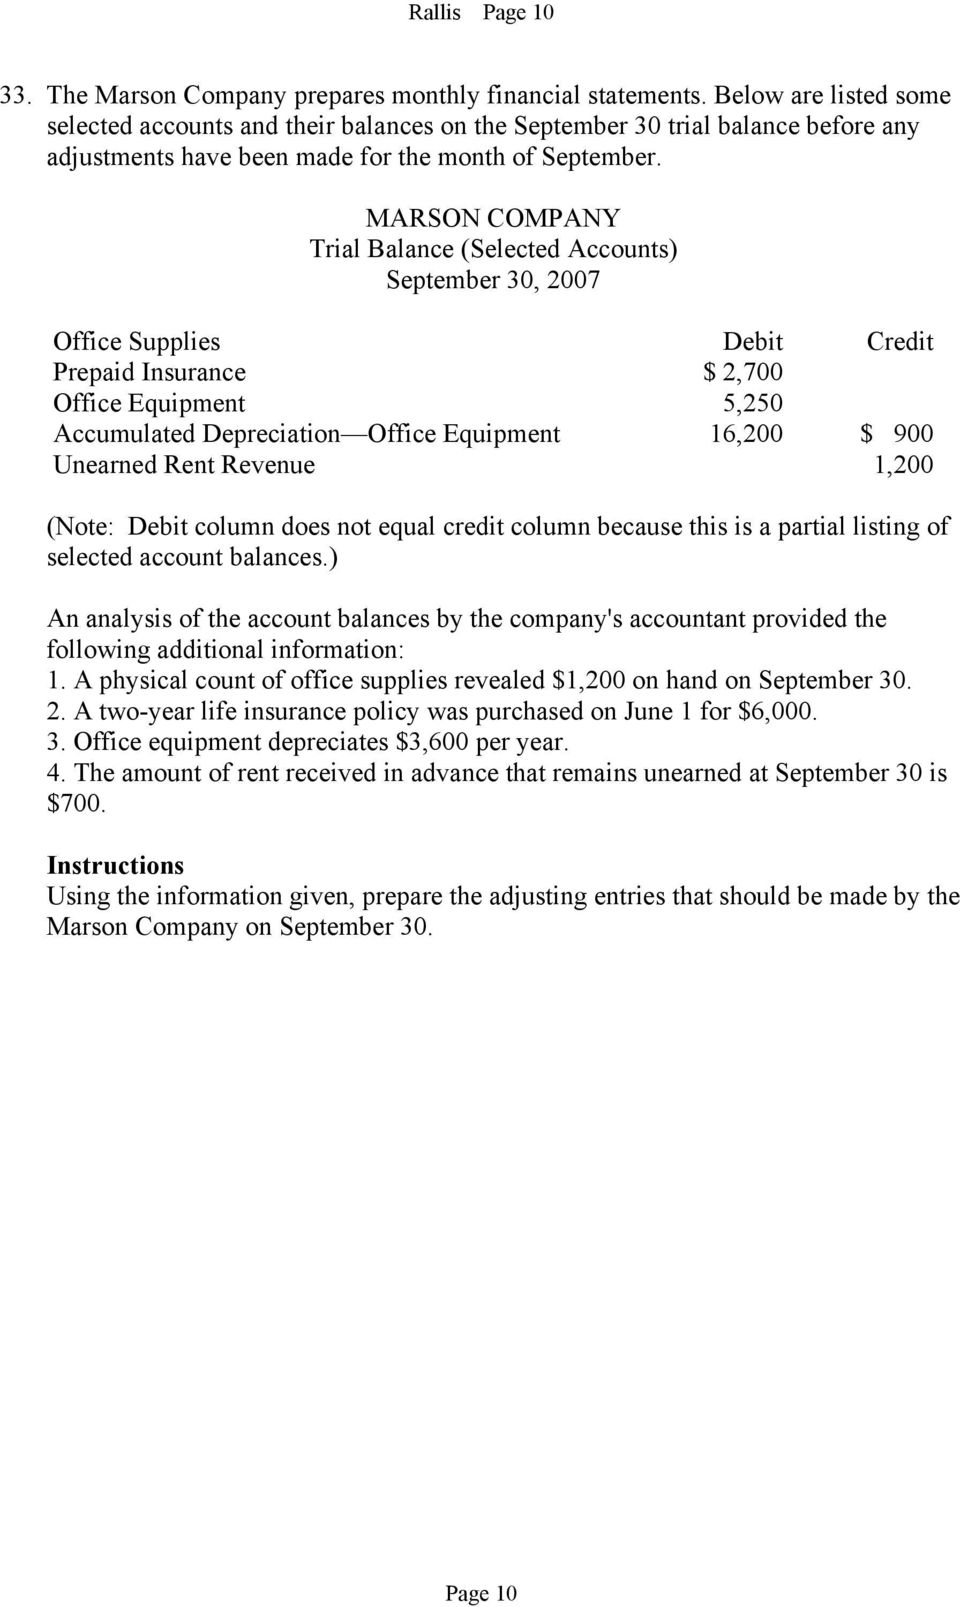 MARSON COMPANY Trial Balance (Selected Accounts) September 30, 2007 Office Supplies Debit Credit Prepaid Insurance $ 2,700 Office Equipment 5,250 Accumulated Depreciation Office Equipment 16,200 $